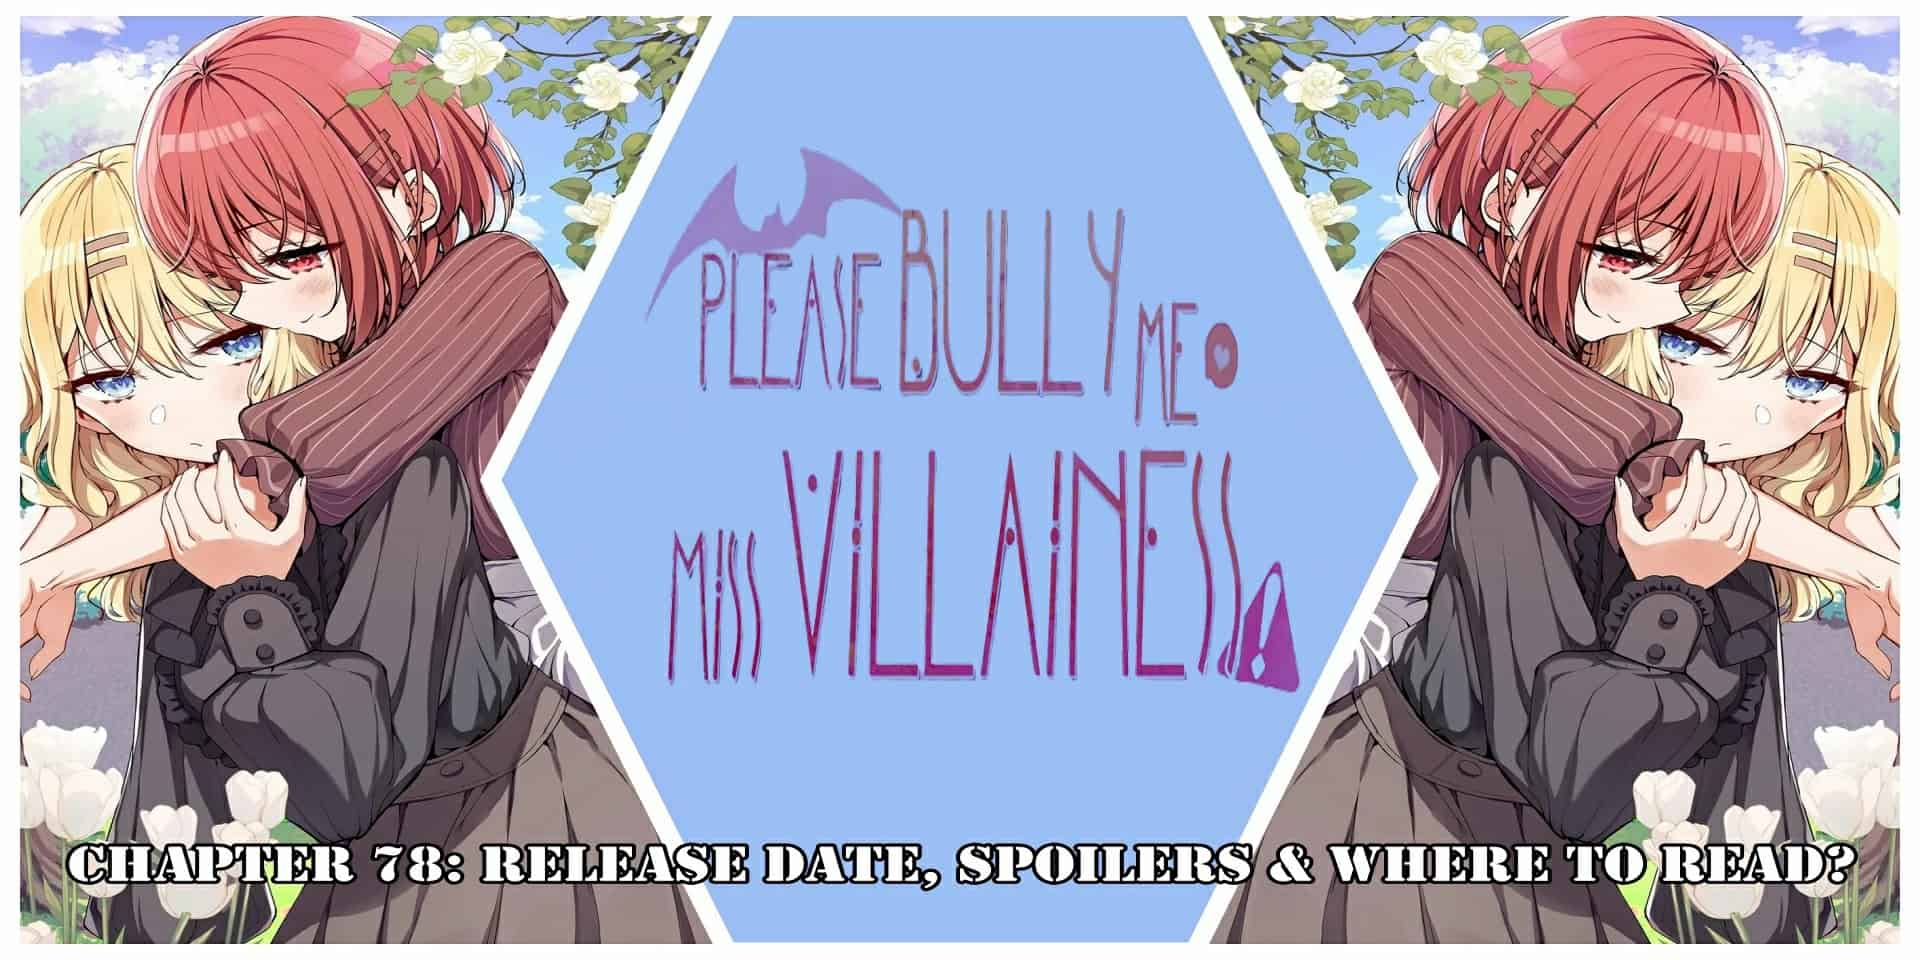 Please Bully Me, Miss Villainess! Chapter 78: Release Date, Spoilers & Where to Read?